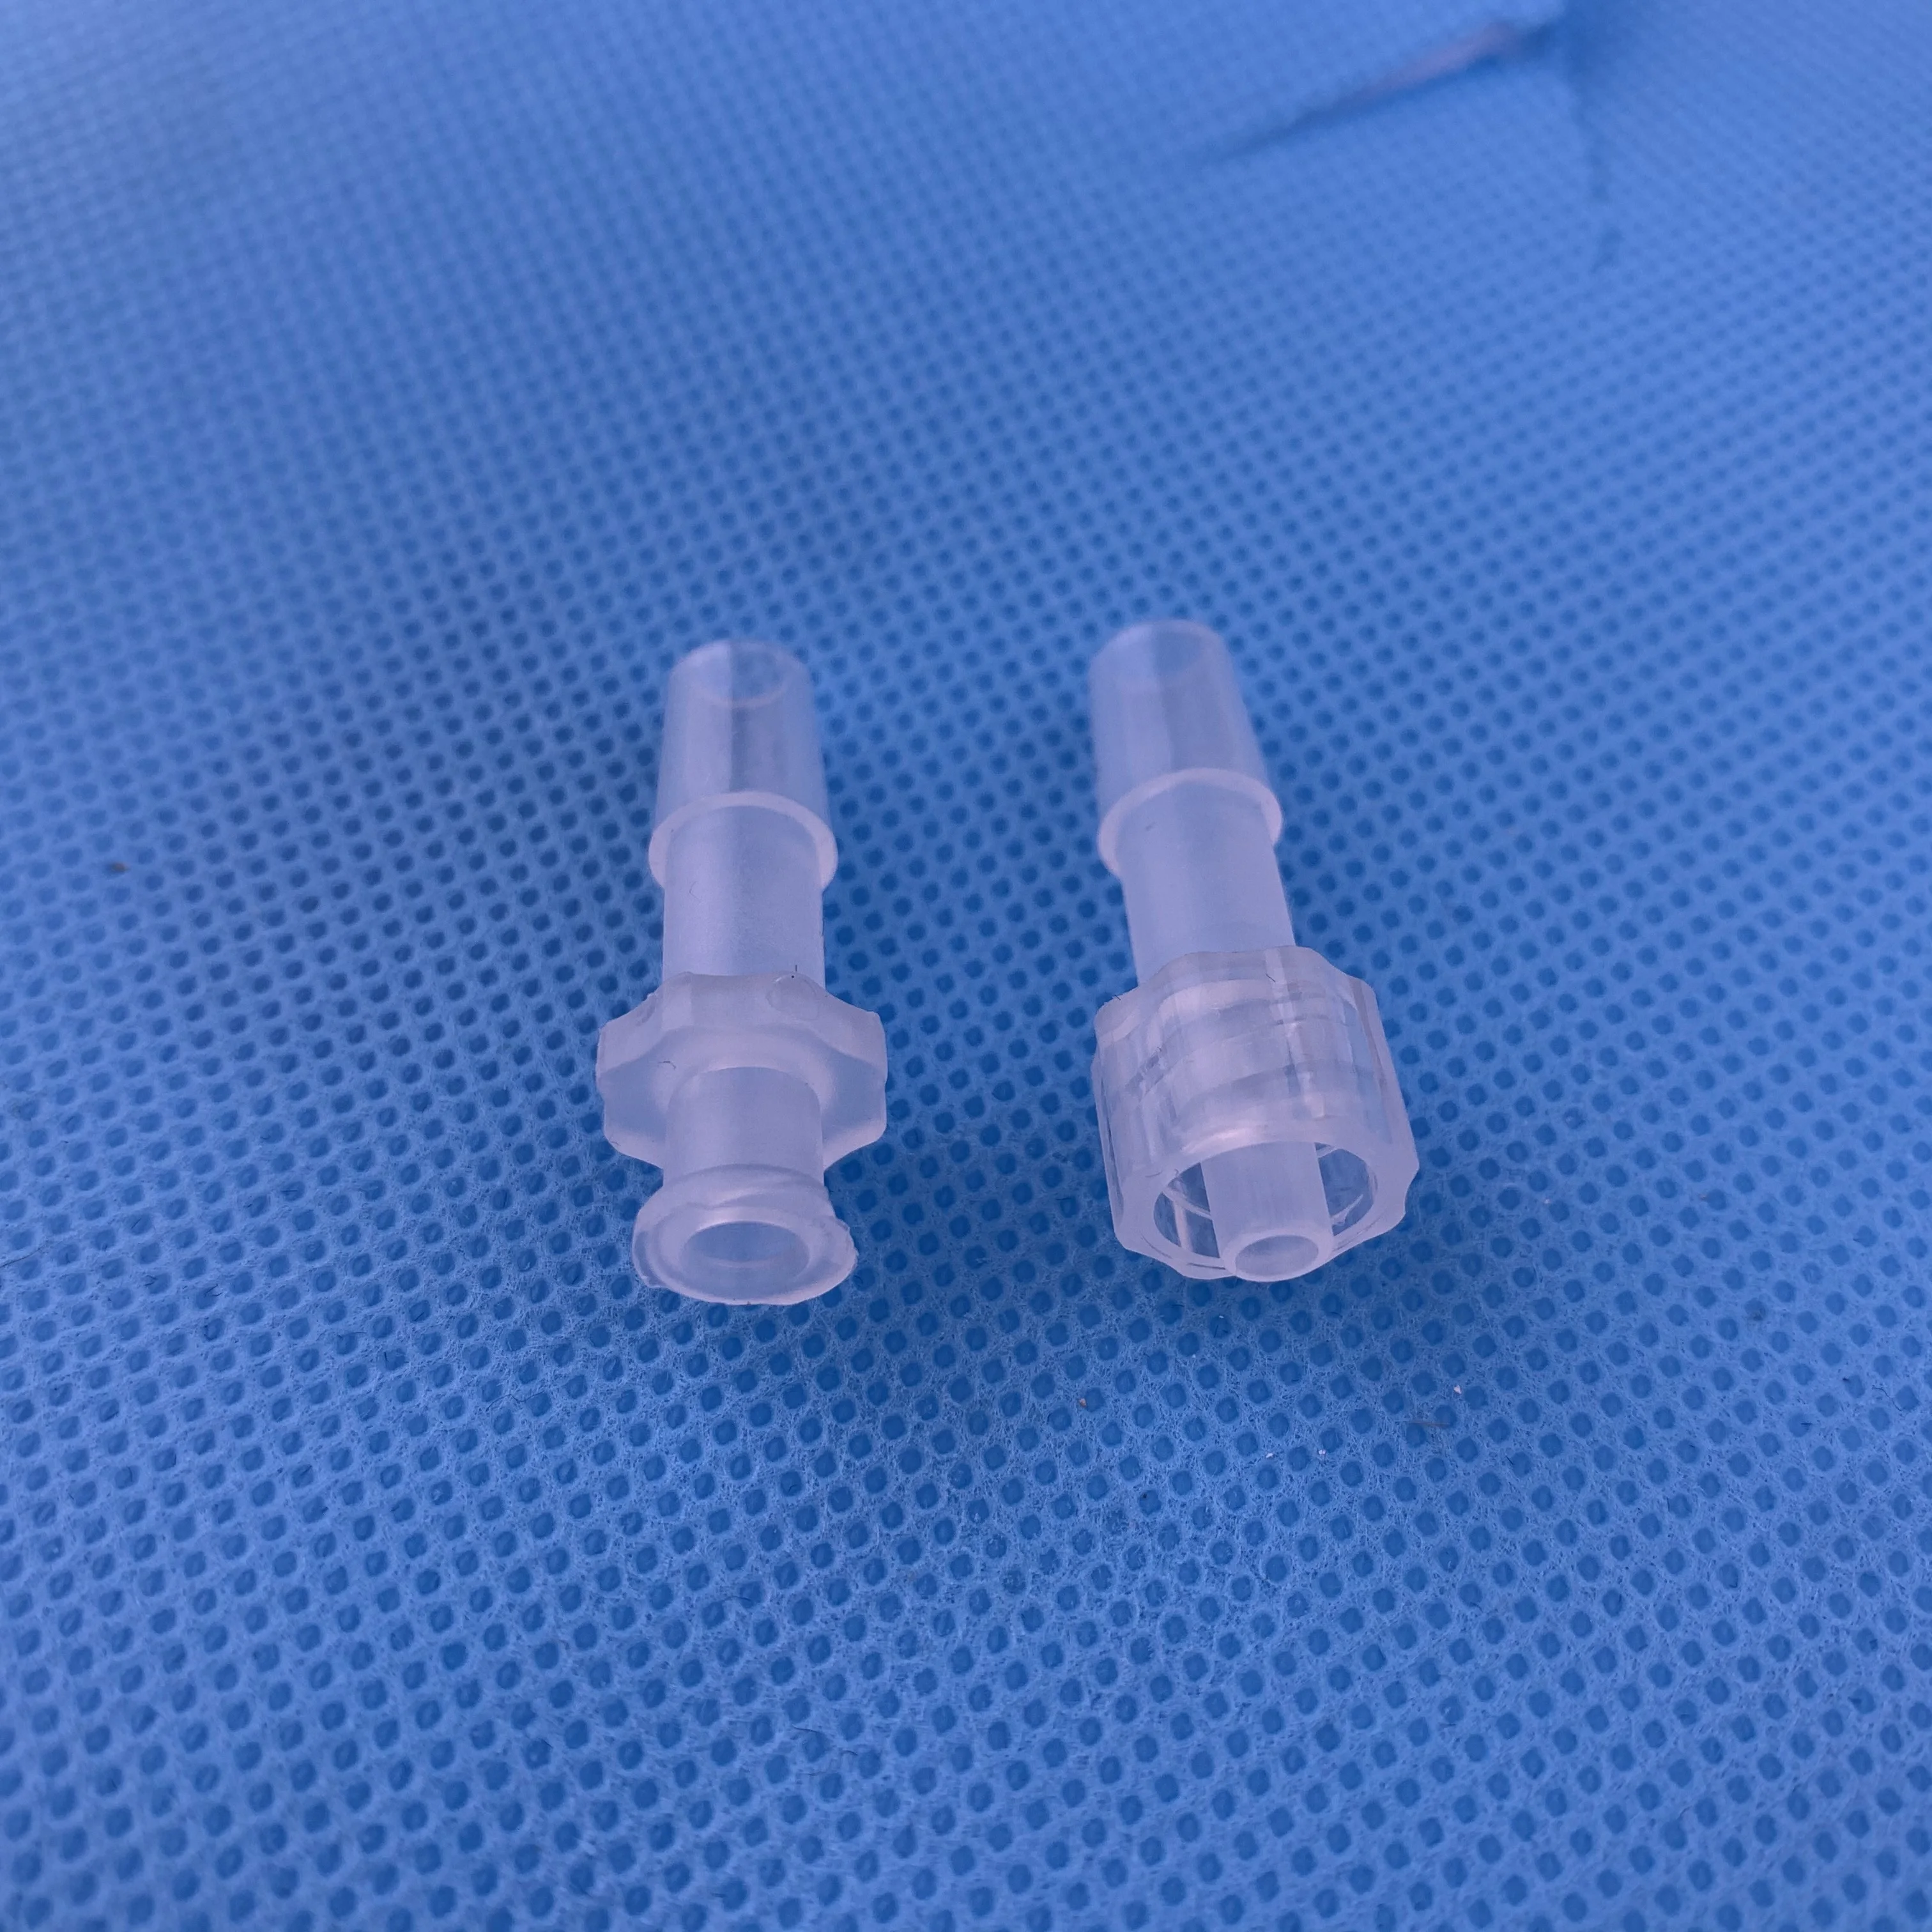 50pcs/lot 1/4inch-Barb Female or Male Luer Tapered Syringe Fitting (polyprop) ,Luer Lock  Tapered Connector